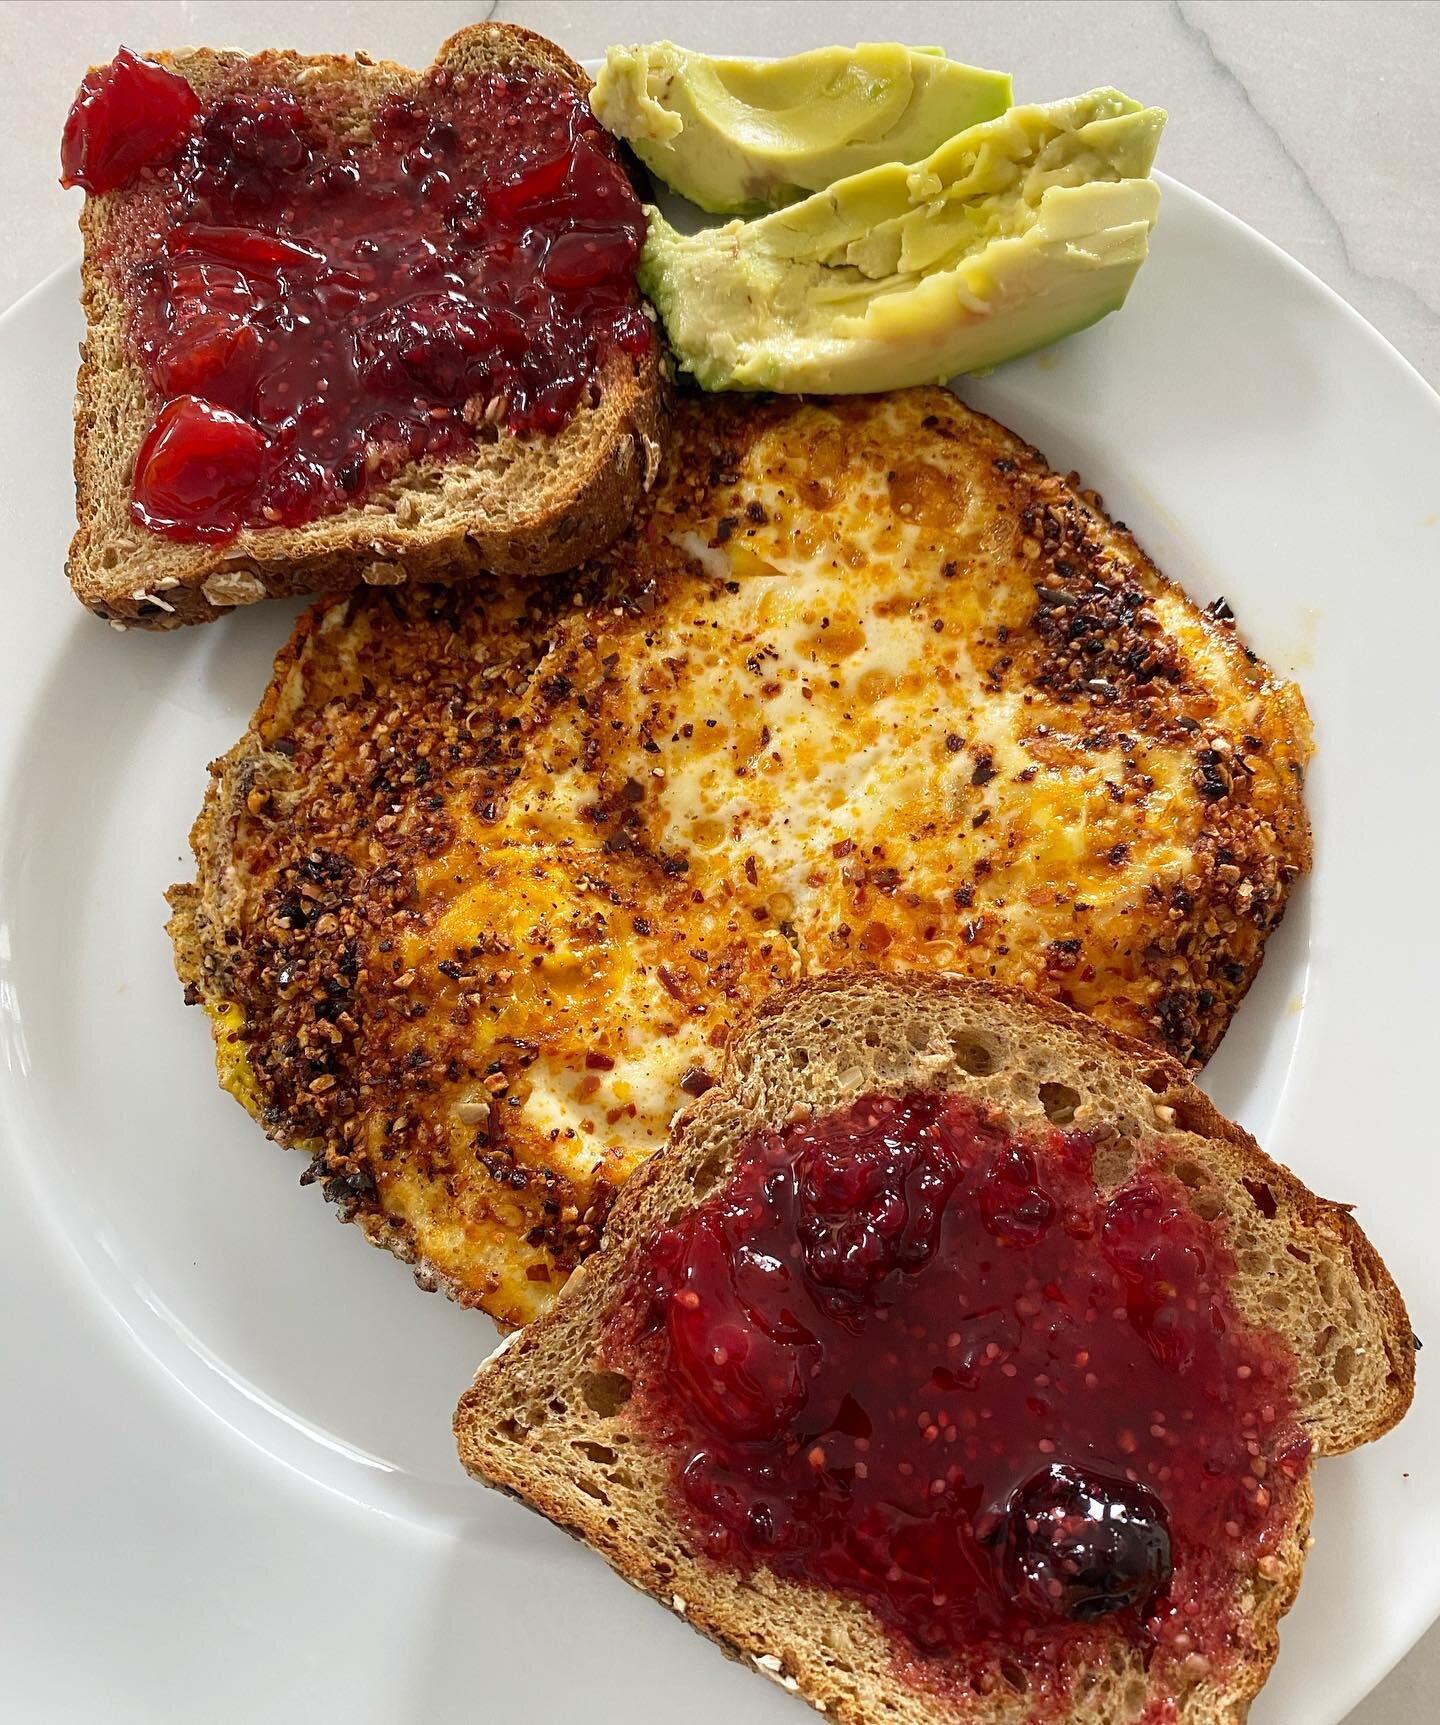 My go-to post-workout breakfast that checks all of the boxes. 🥑🍳This savory, sweet, and spicy combo is simple, satisfying, and delicious!

Fried eggs in garlic chili crunch oil with toast topped with avocado and a locally produced jam. 

I&rsquo;m 